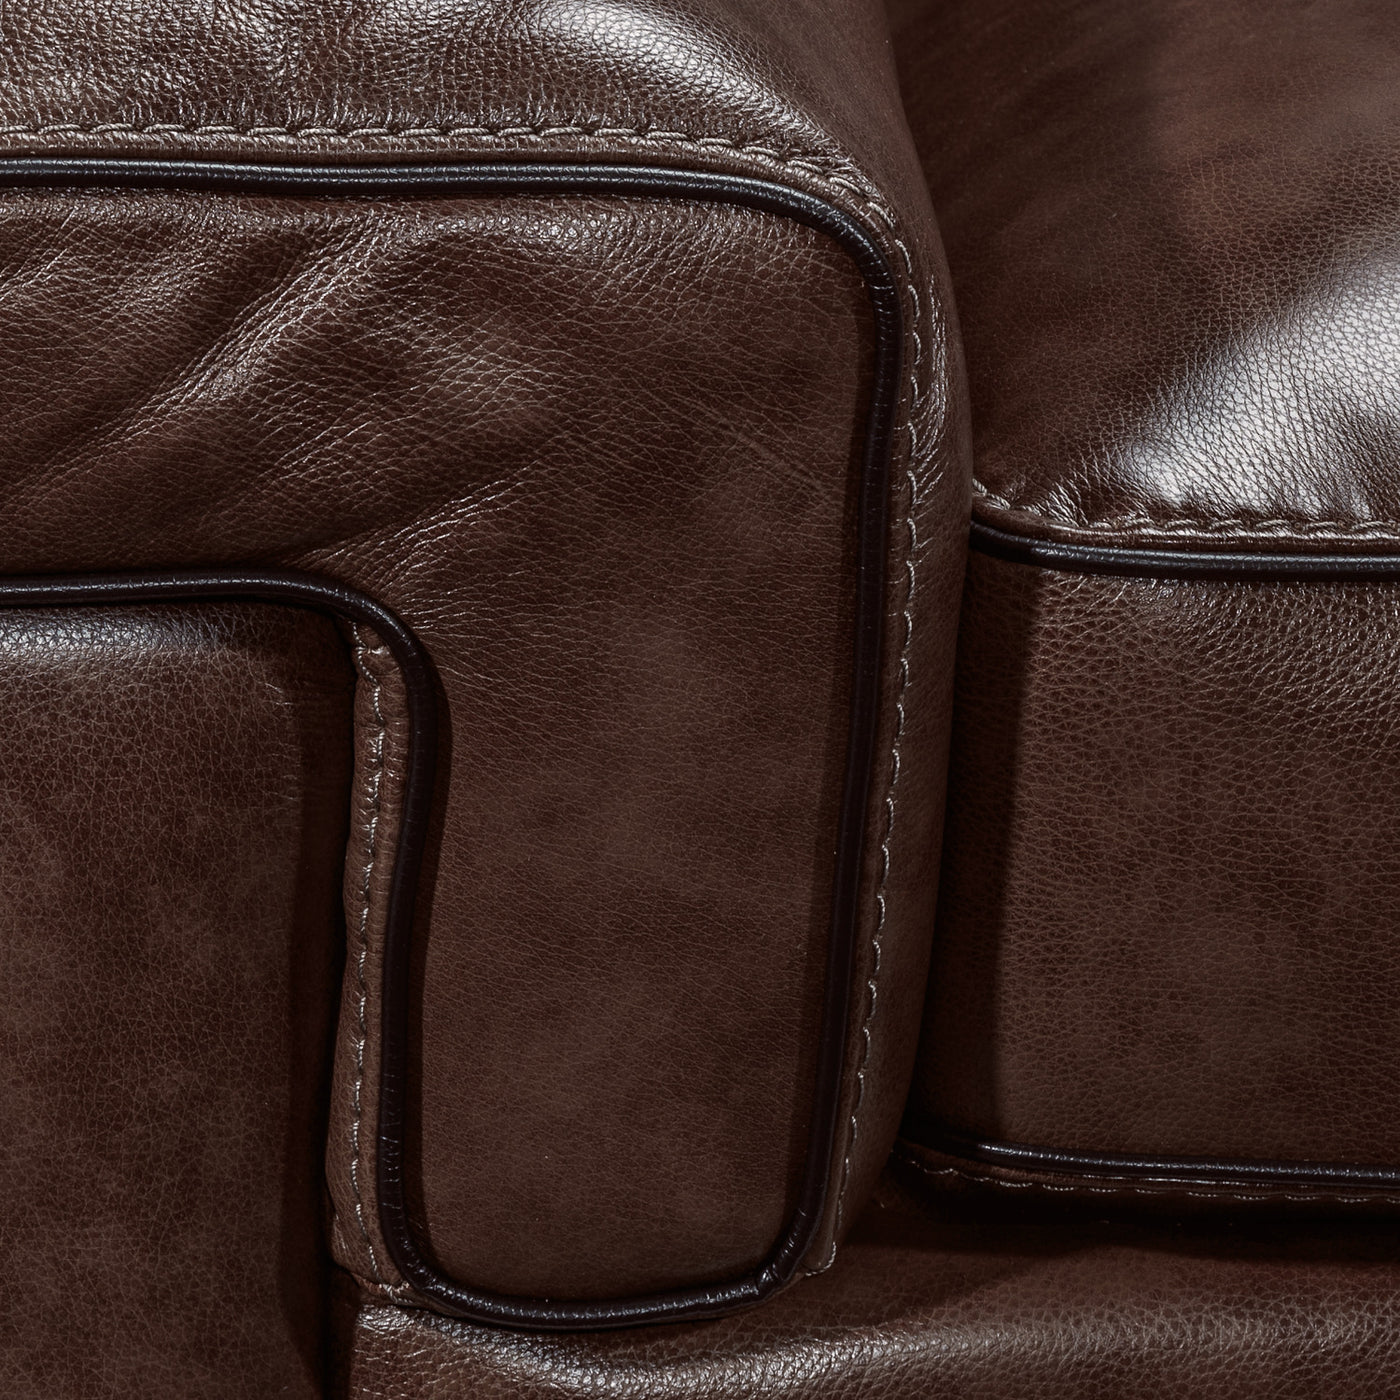 Stampede Leather Loveseat - Coffee